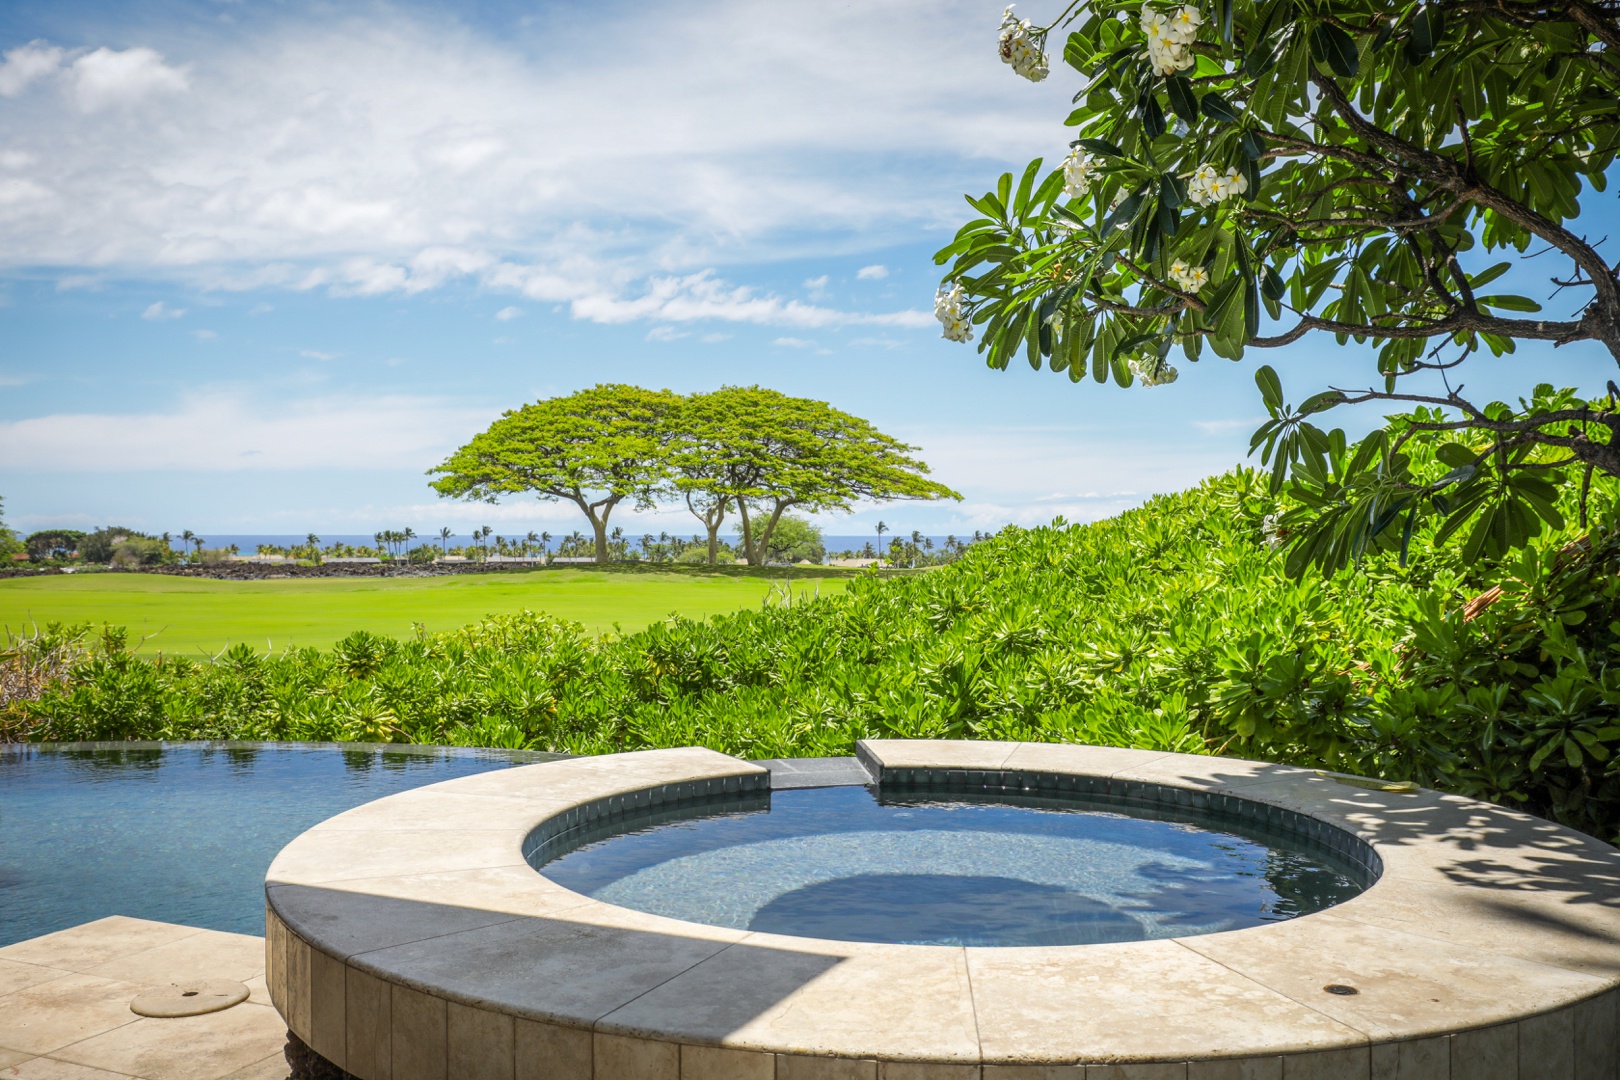 Kailua Kona Vacation Rentals, 4BD Pakui Street (147) Estate Home at Four Seasons Resort at Hualalai - Lounge in paradise in the private spa with a waterfall feature into the stone set infinity pool.